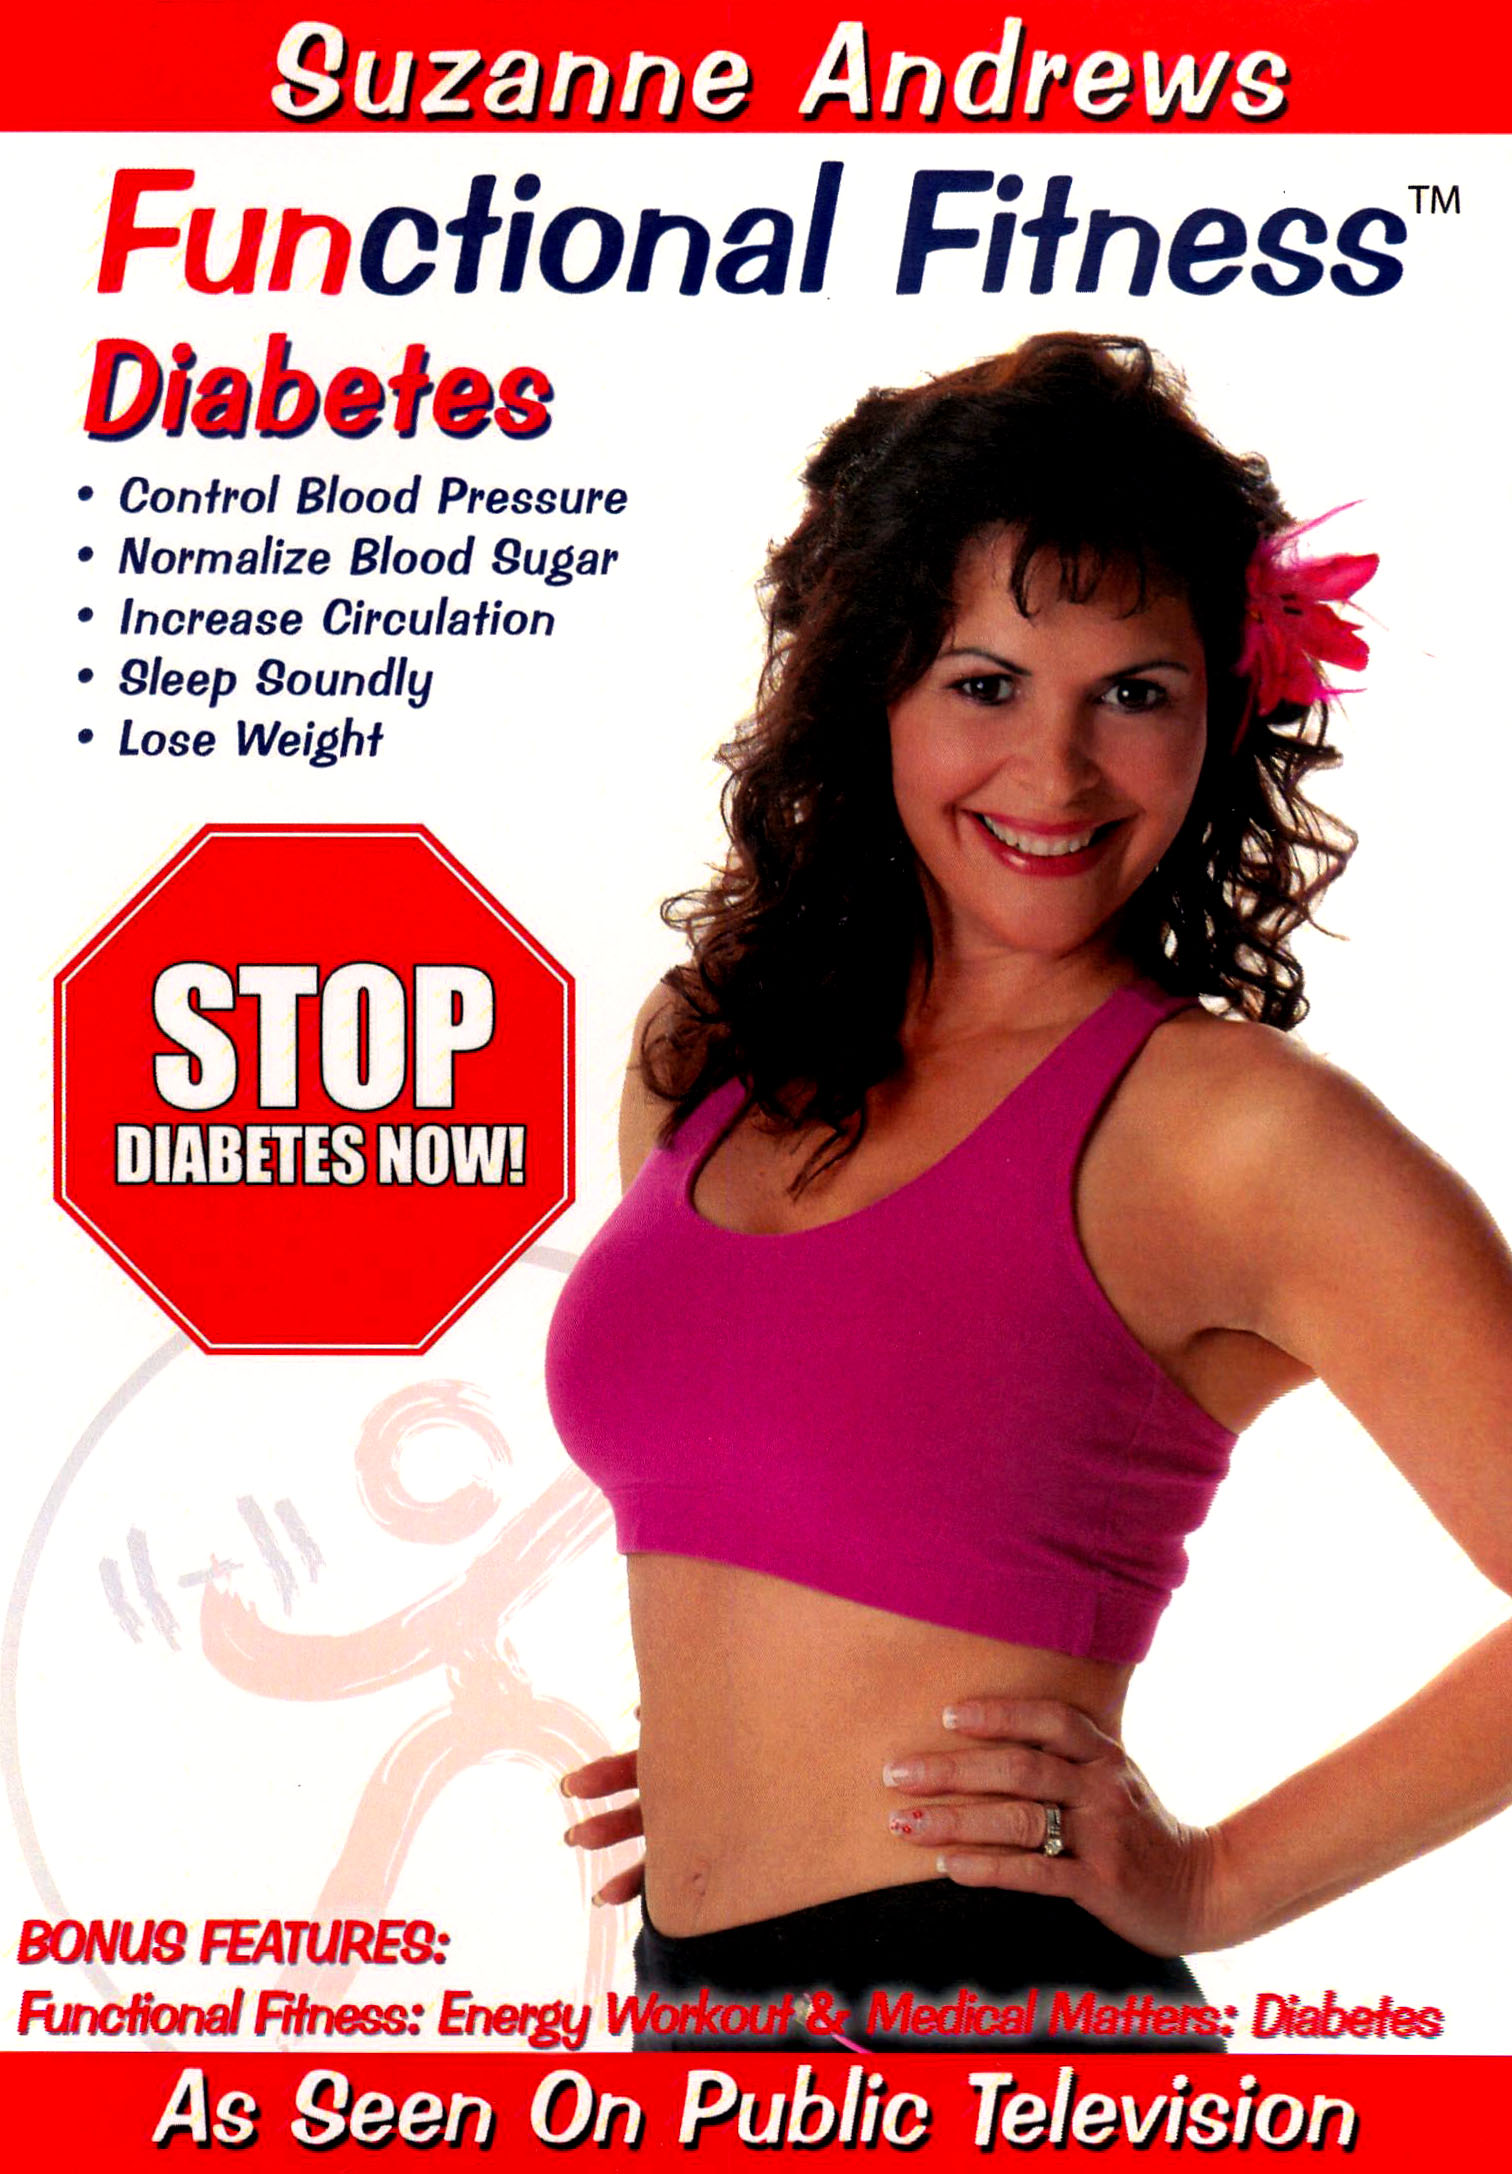 Suzanne Andrews: Functional Fitness - Diabetes - | Synopsis ...